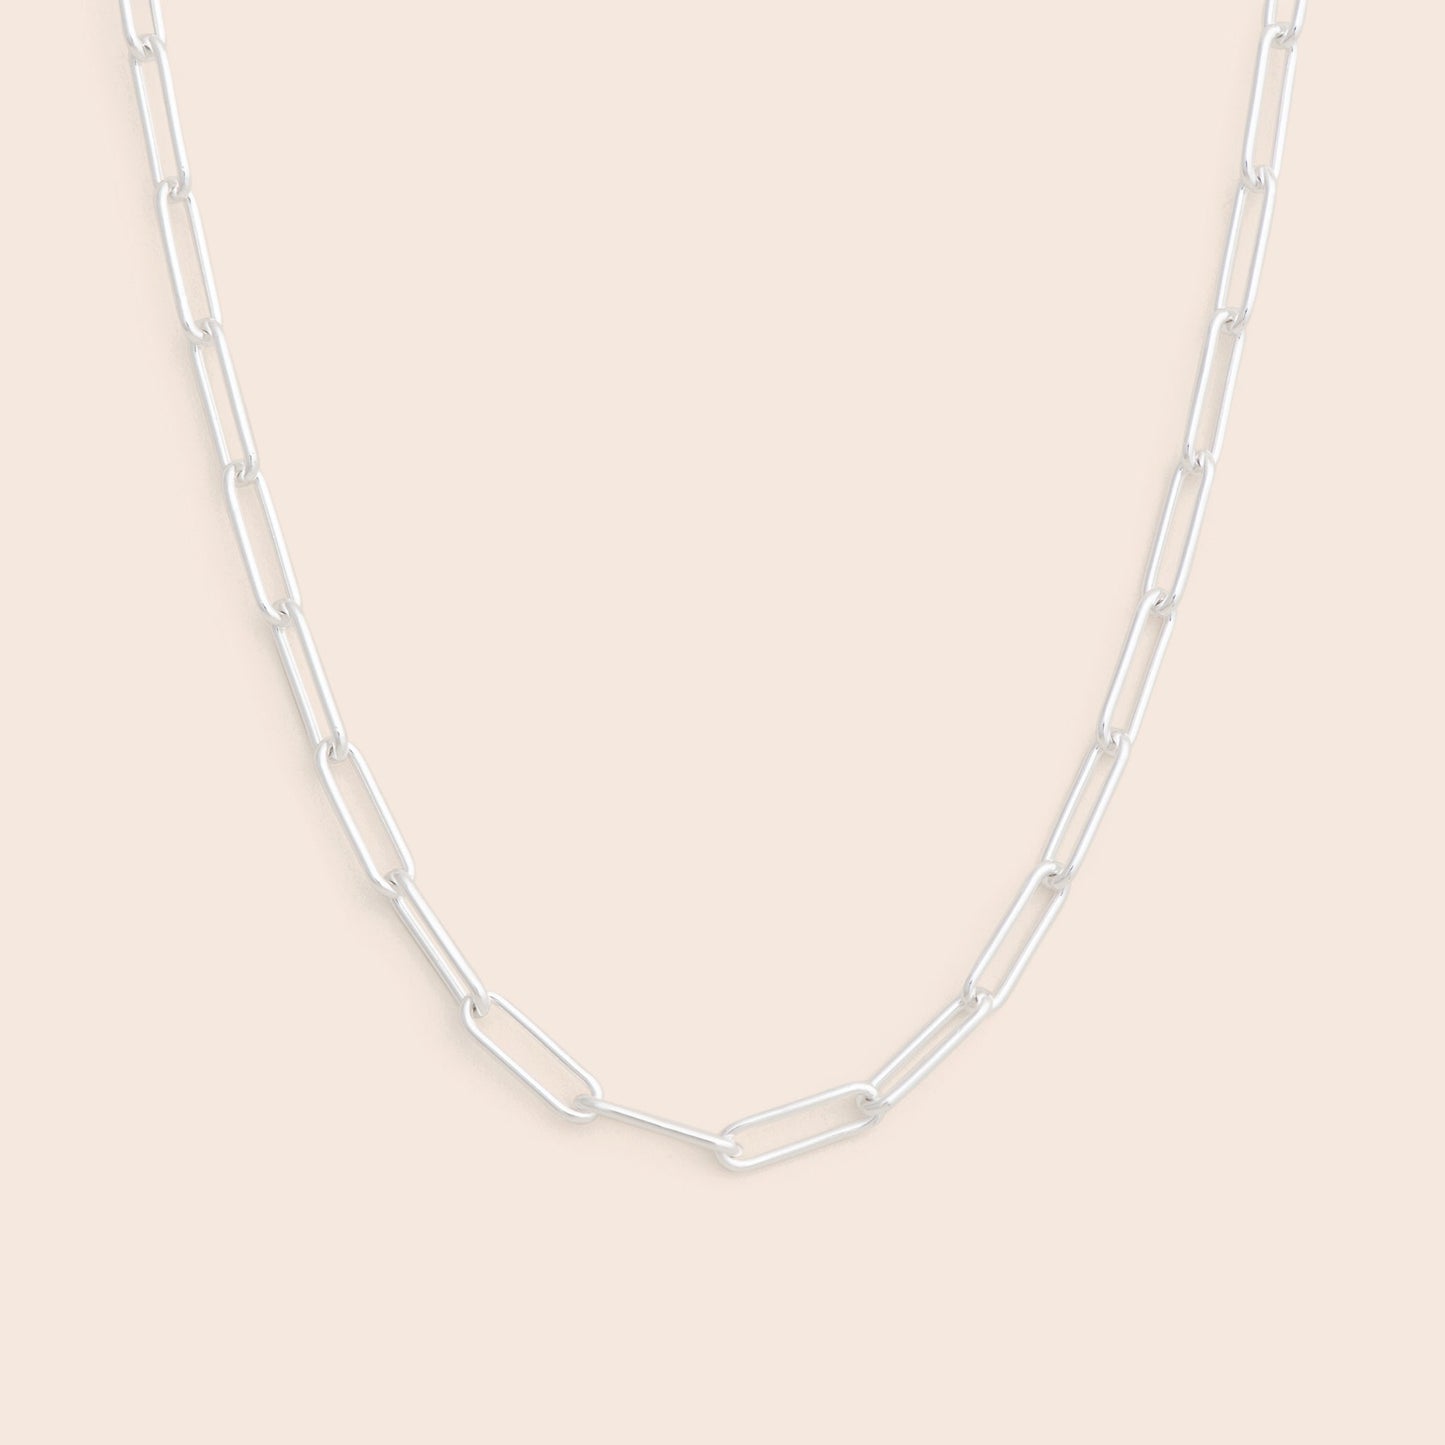 Thick Silver Paper Clip Chain Necklace - Gemlet